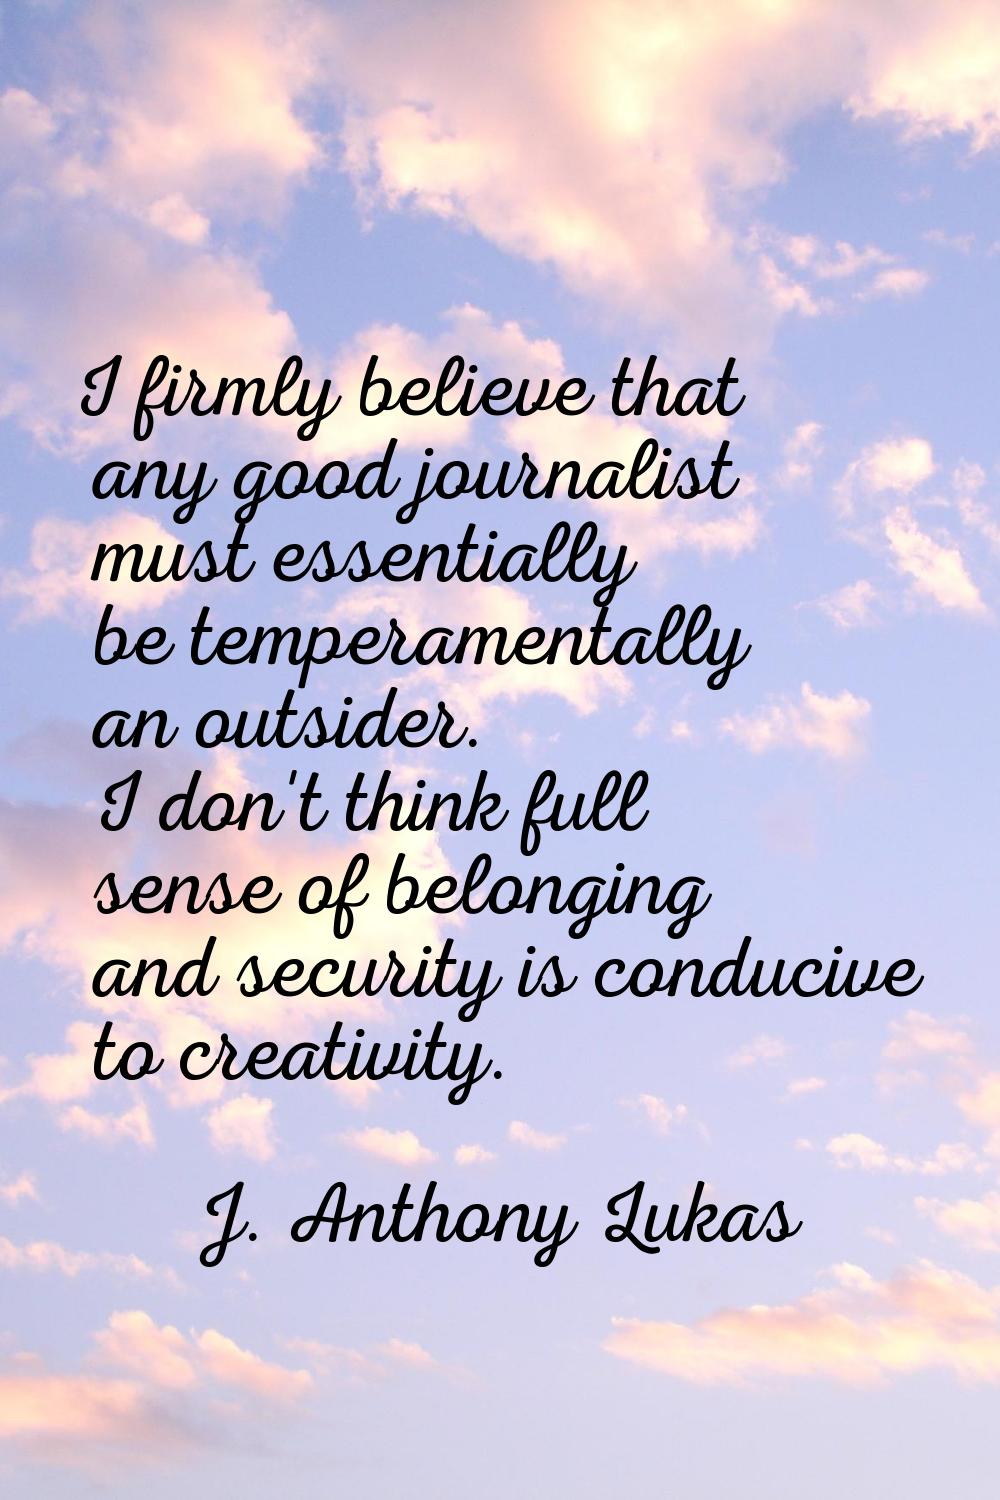 I firmly believe that any good journalist must essentially be temperamentally an outsider. I don't 